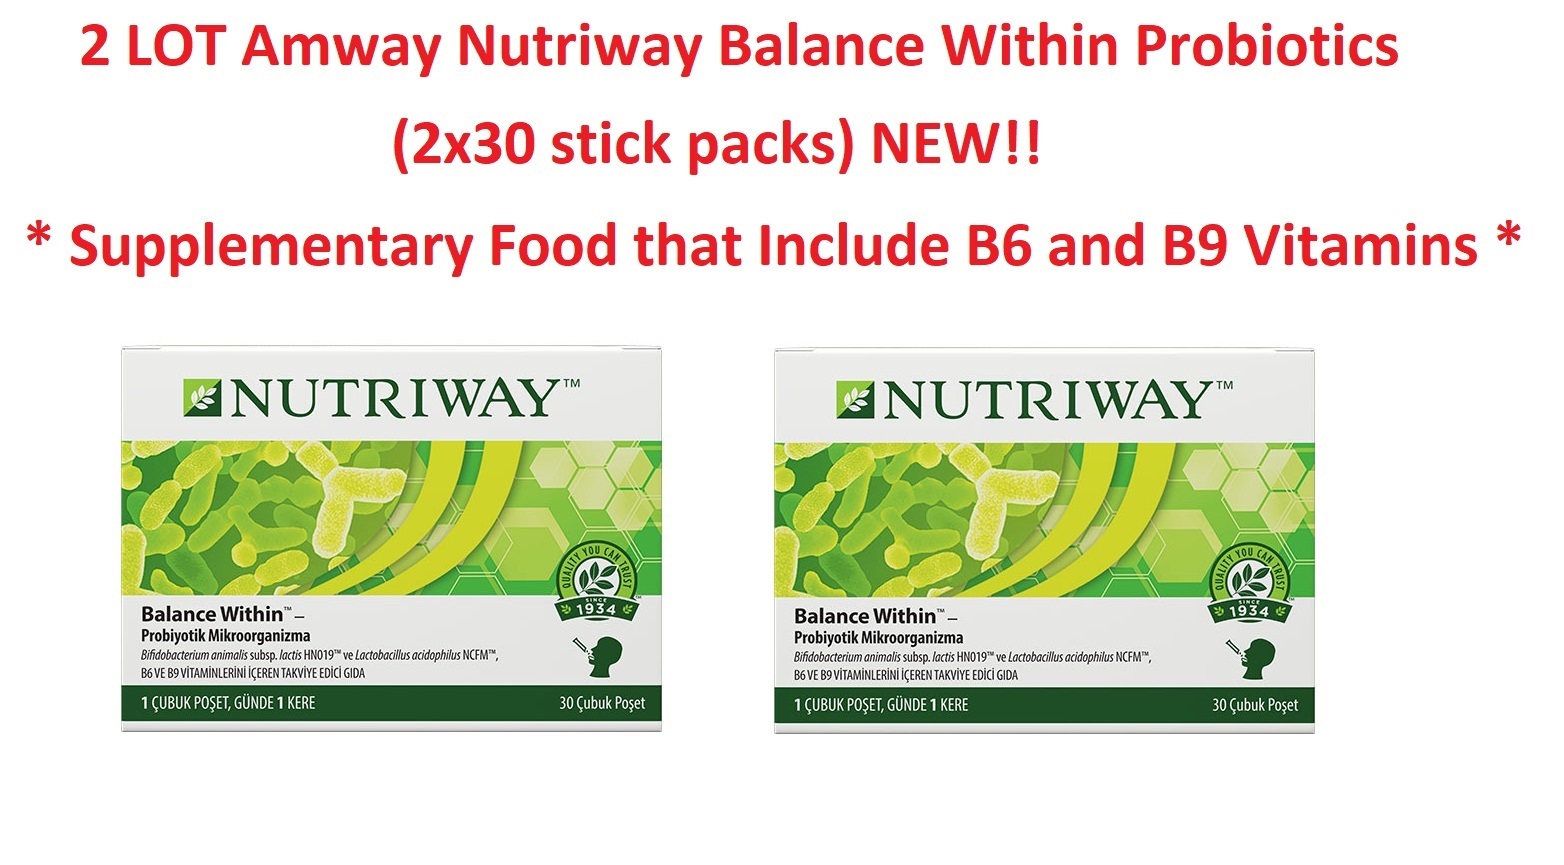 2 LOT Amway Nutriway Balance Within Probiotics (2x30 stick packs) NEW!!